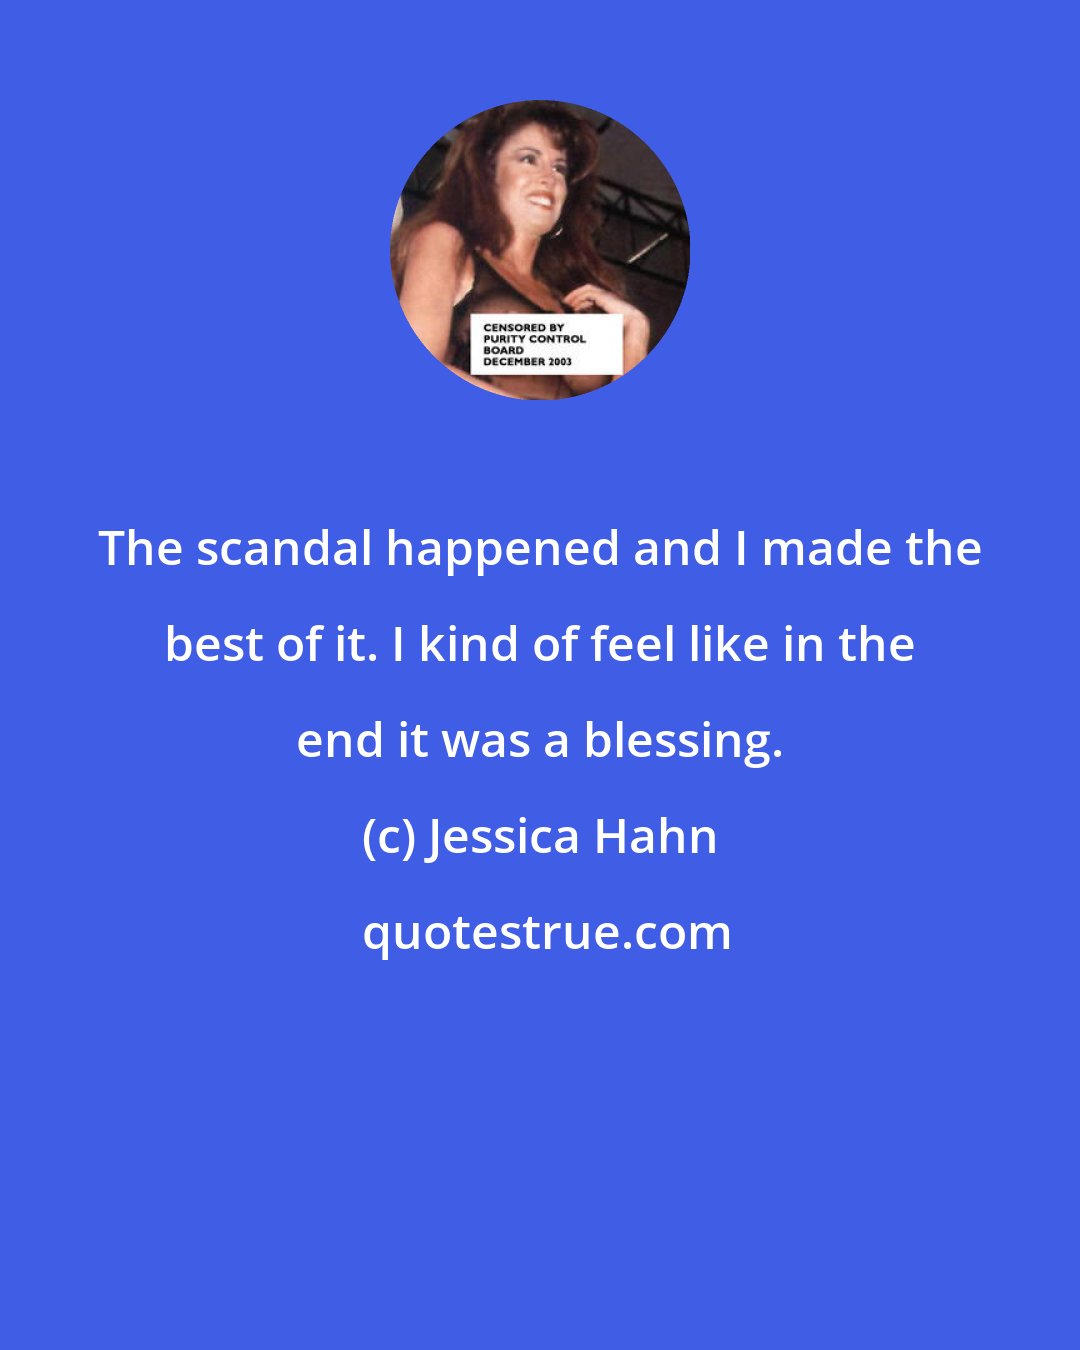 Jessica Hahn: The scandal happened and I made the best of it. I kind of feel like in the end it was a blessing.